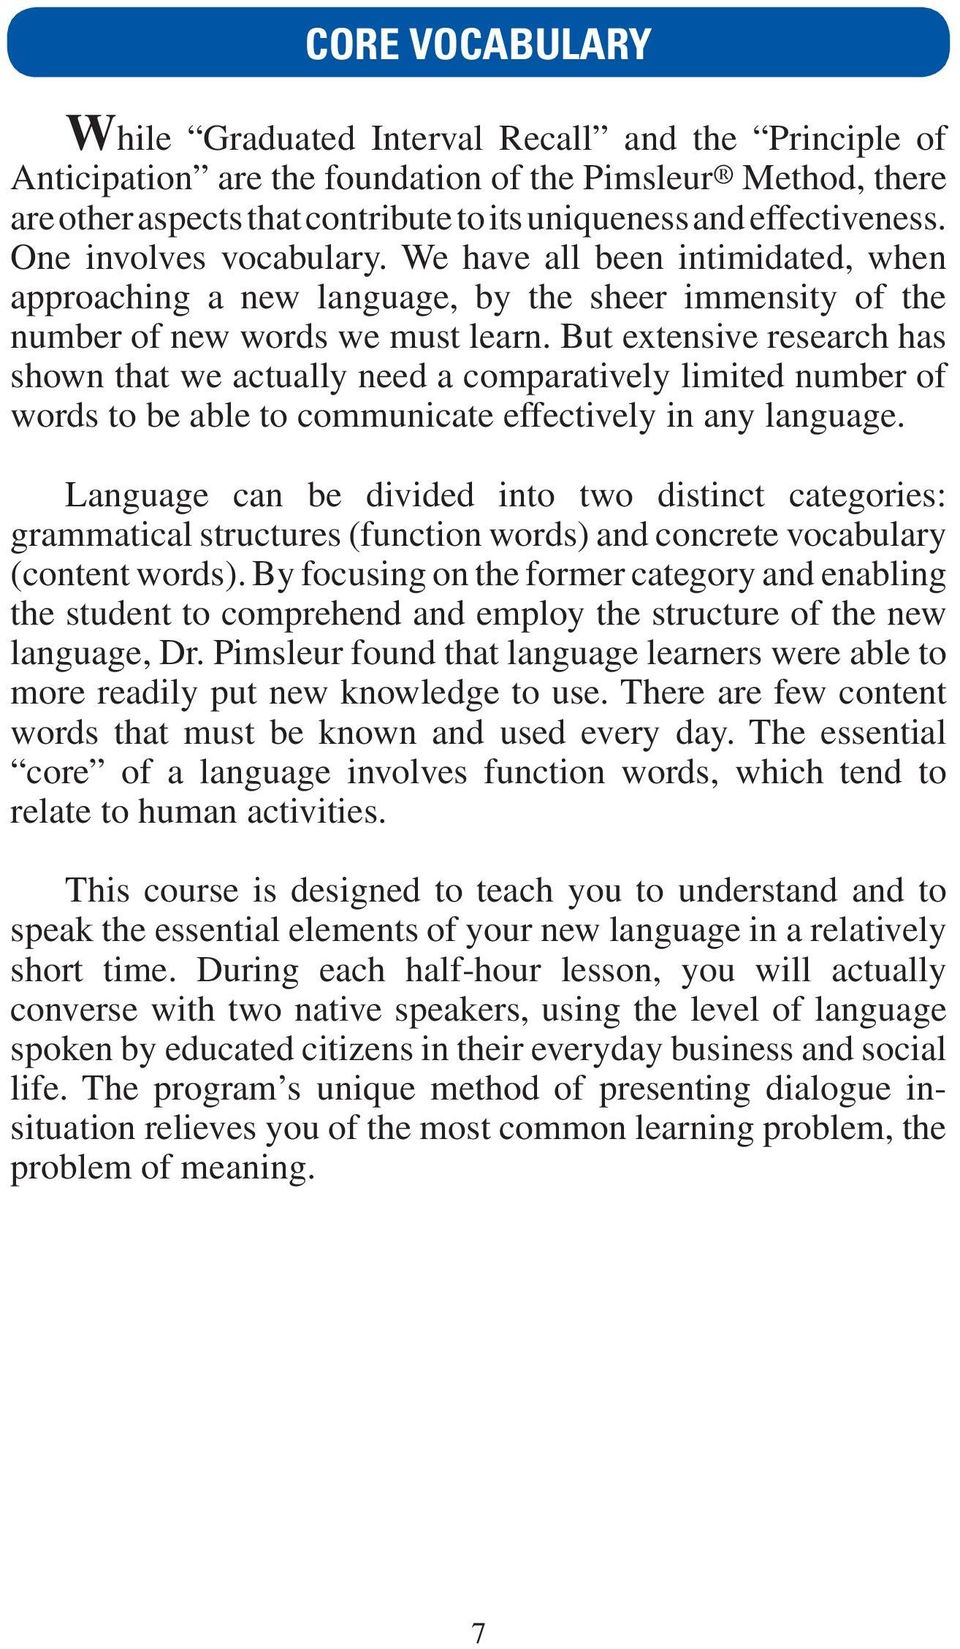 But extensive research has shown that we actually need a comparatively limited number of words to be able to communicate effectively in any language.